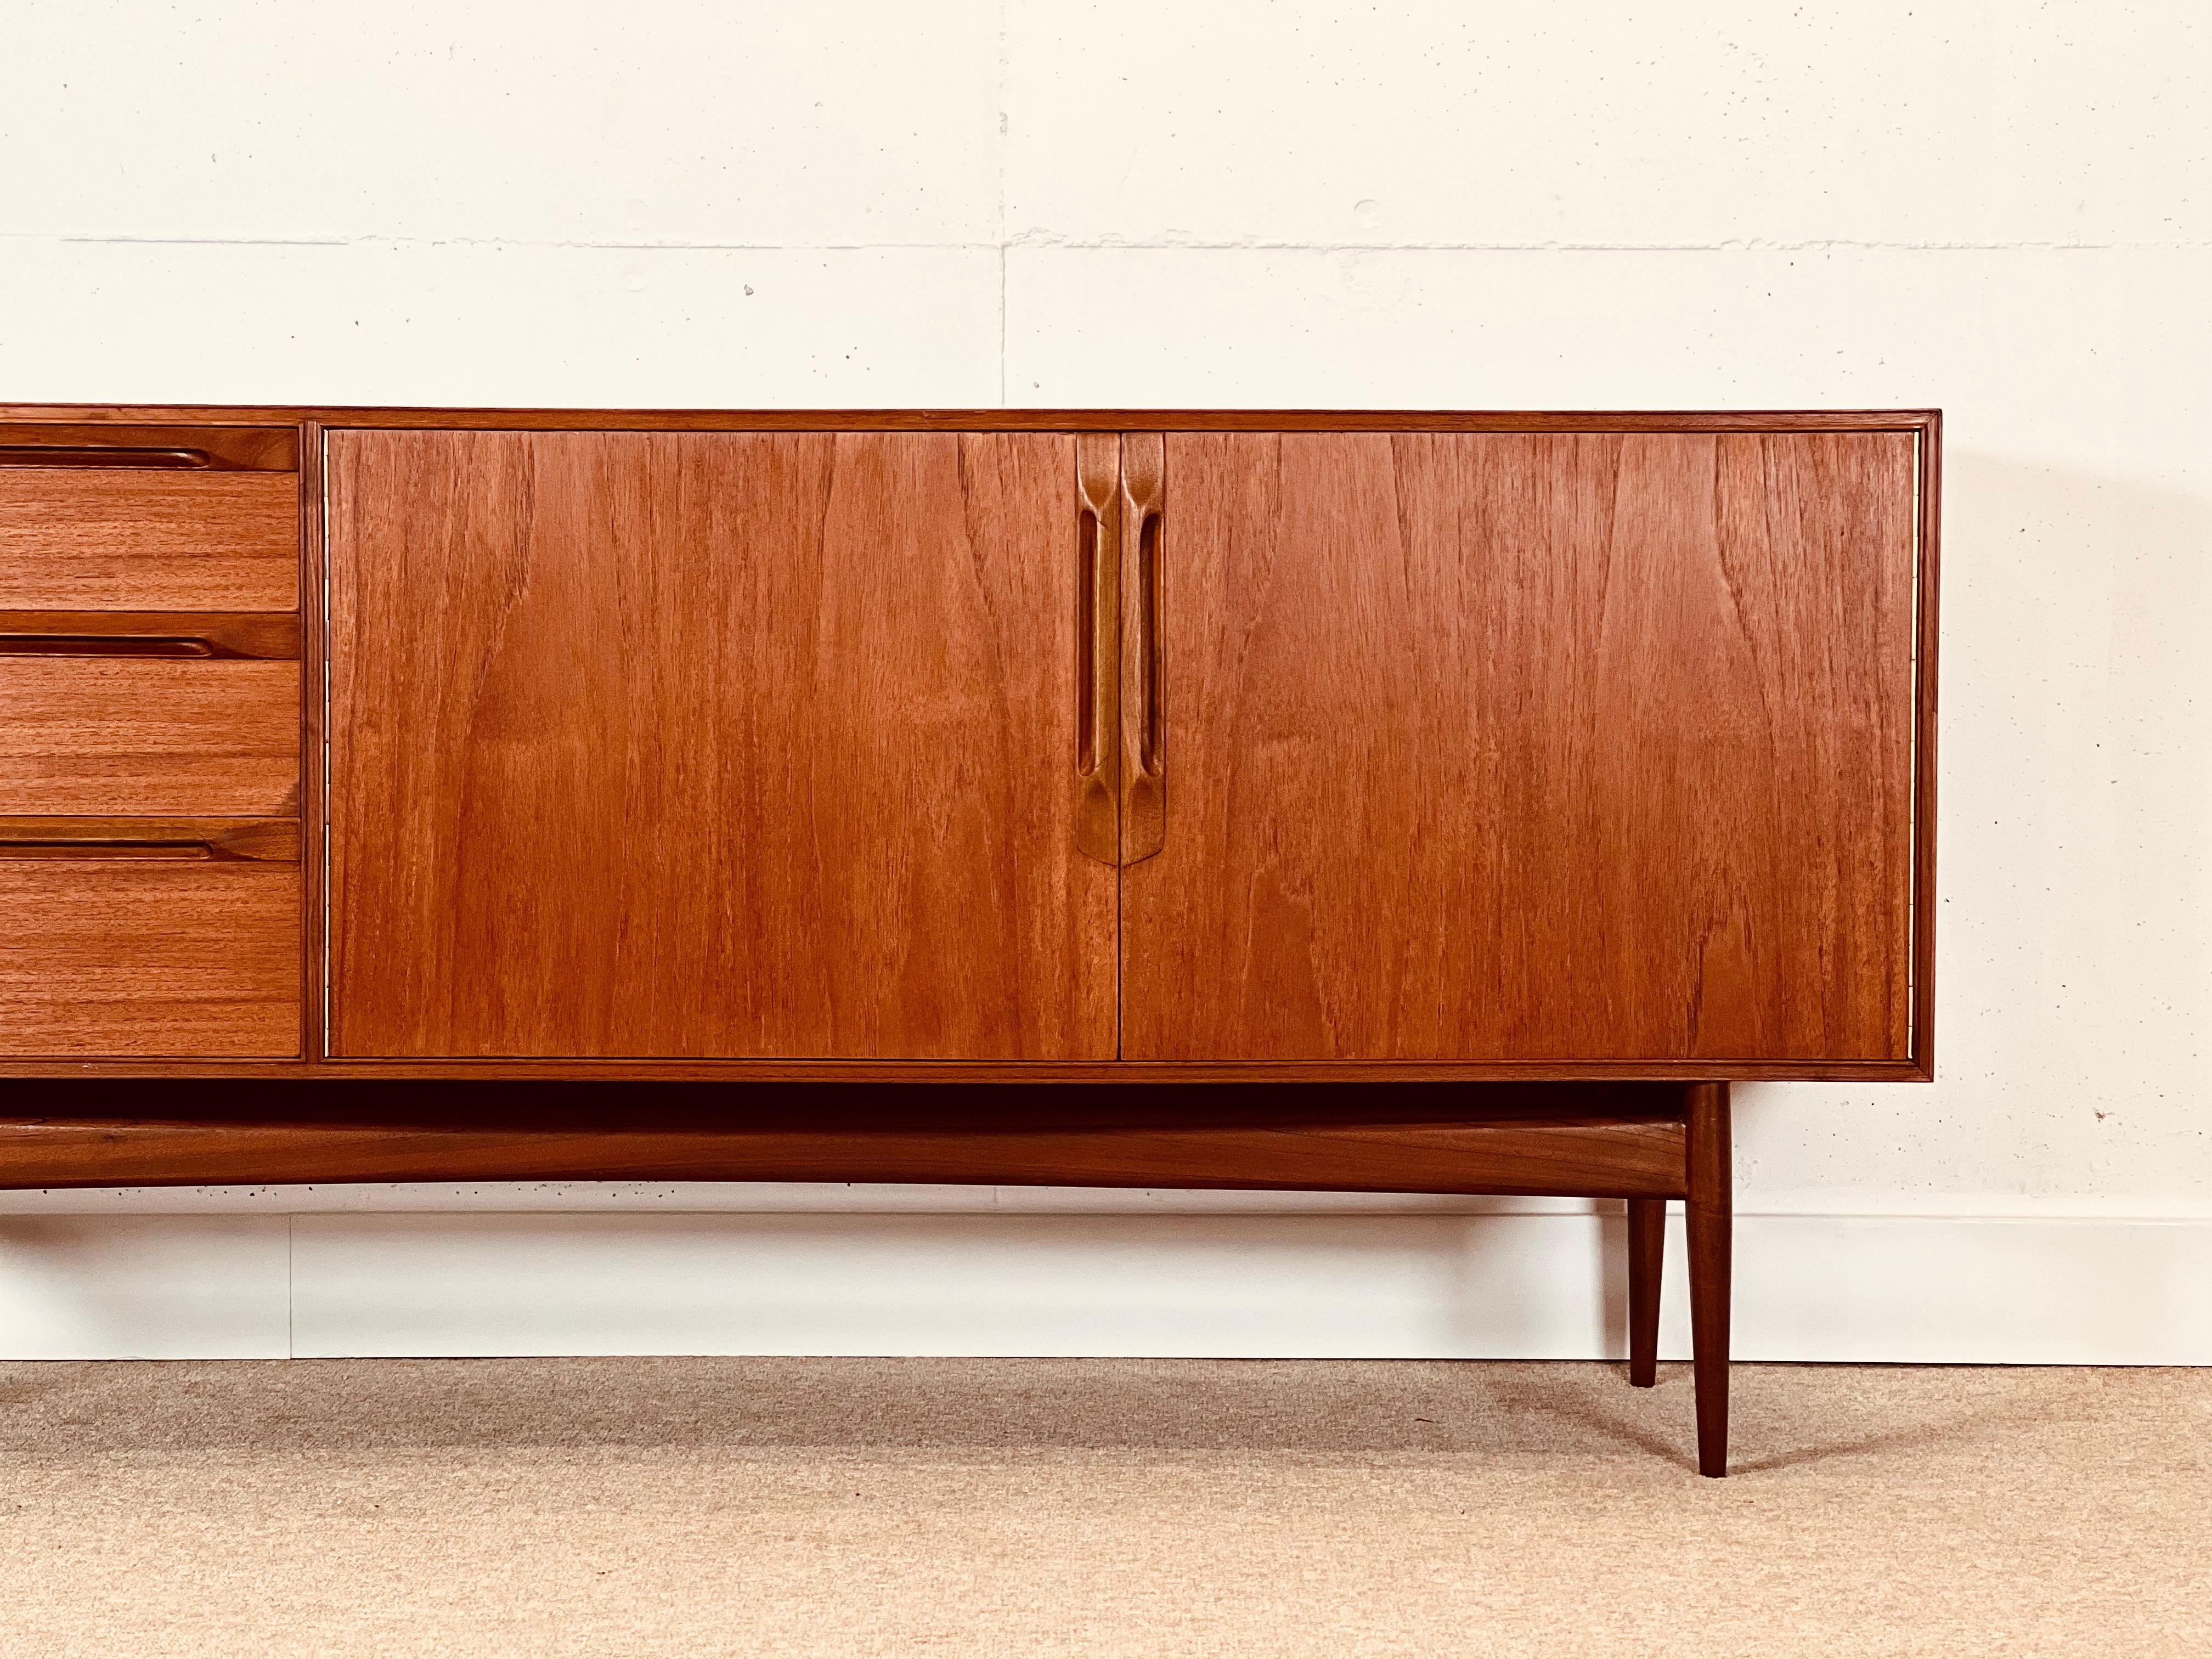 Fascinating creation of Tom Robertson, the Scottish firm A.H. McIntosh manufactured in the early ’70s under the name Eden.

The structure is in high-quality laminated teak wood.

The front features three drawers (the upper one with compartments for